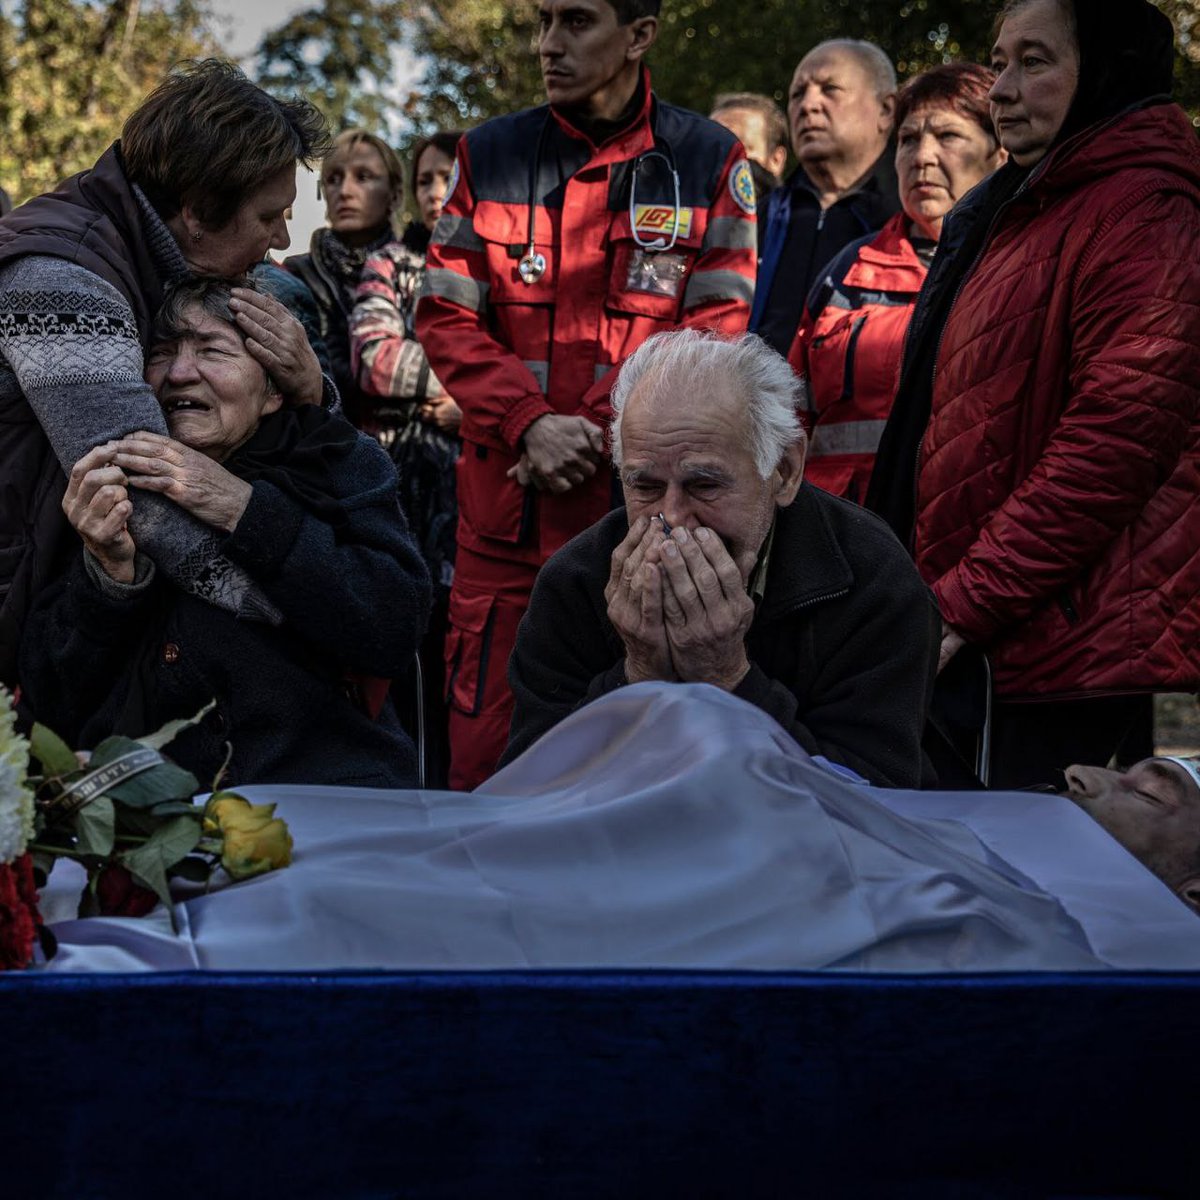 Instead of a thousand words. Mourning in eastern Ukraine on Oct. 18. at the funeral of a 42-year-old Ukrainian soldier who was killed by shrapnel during fighting. 📷: @finbarroreilly for @nytimes